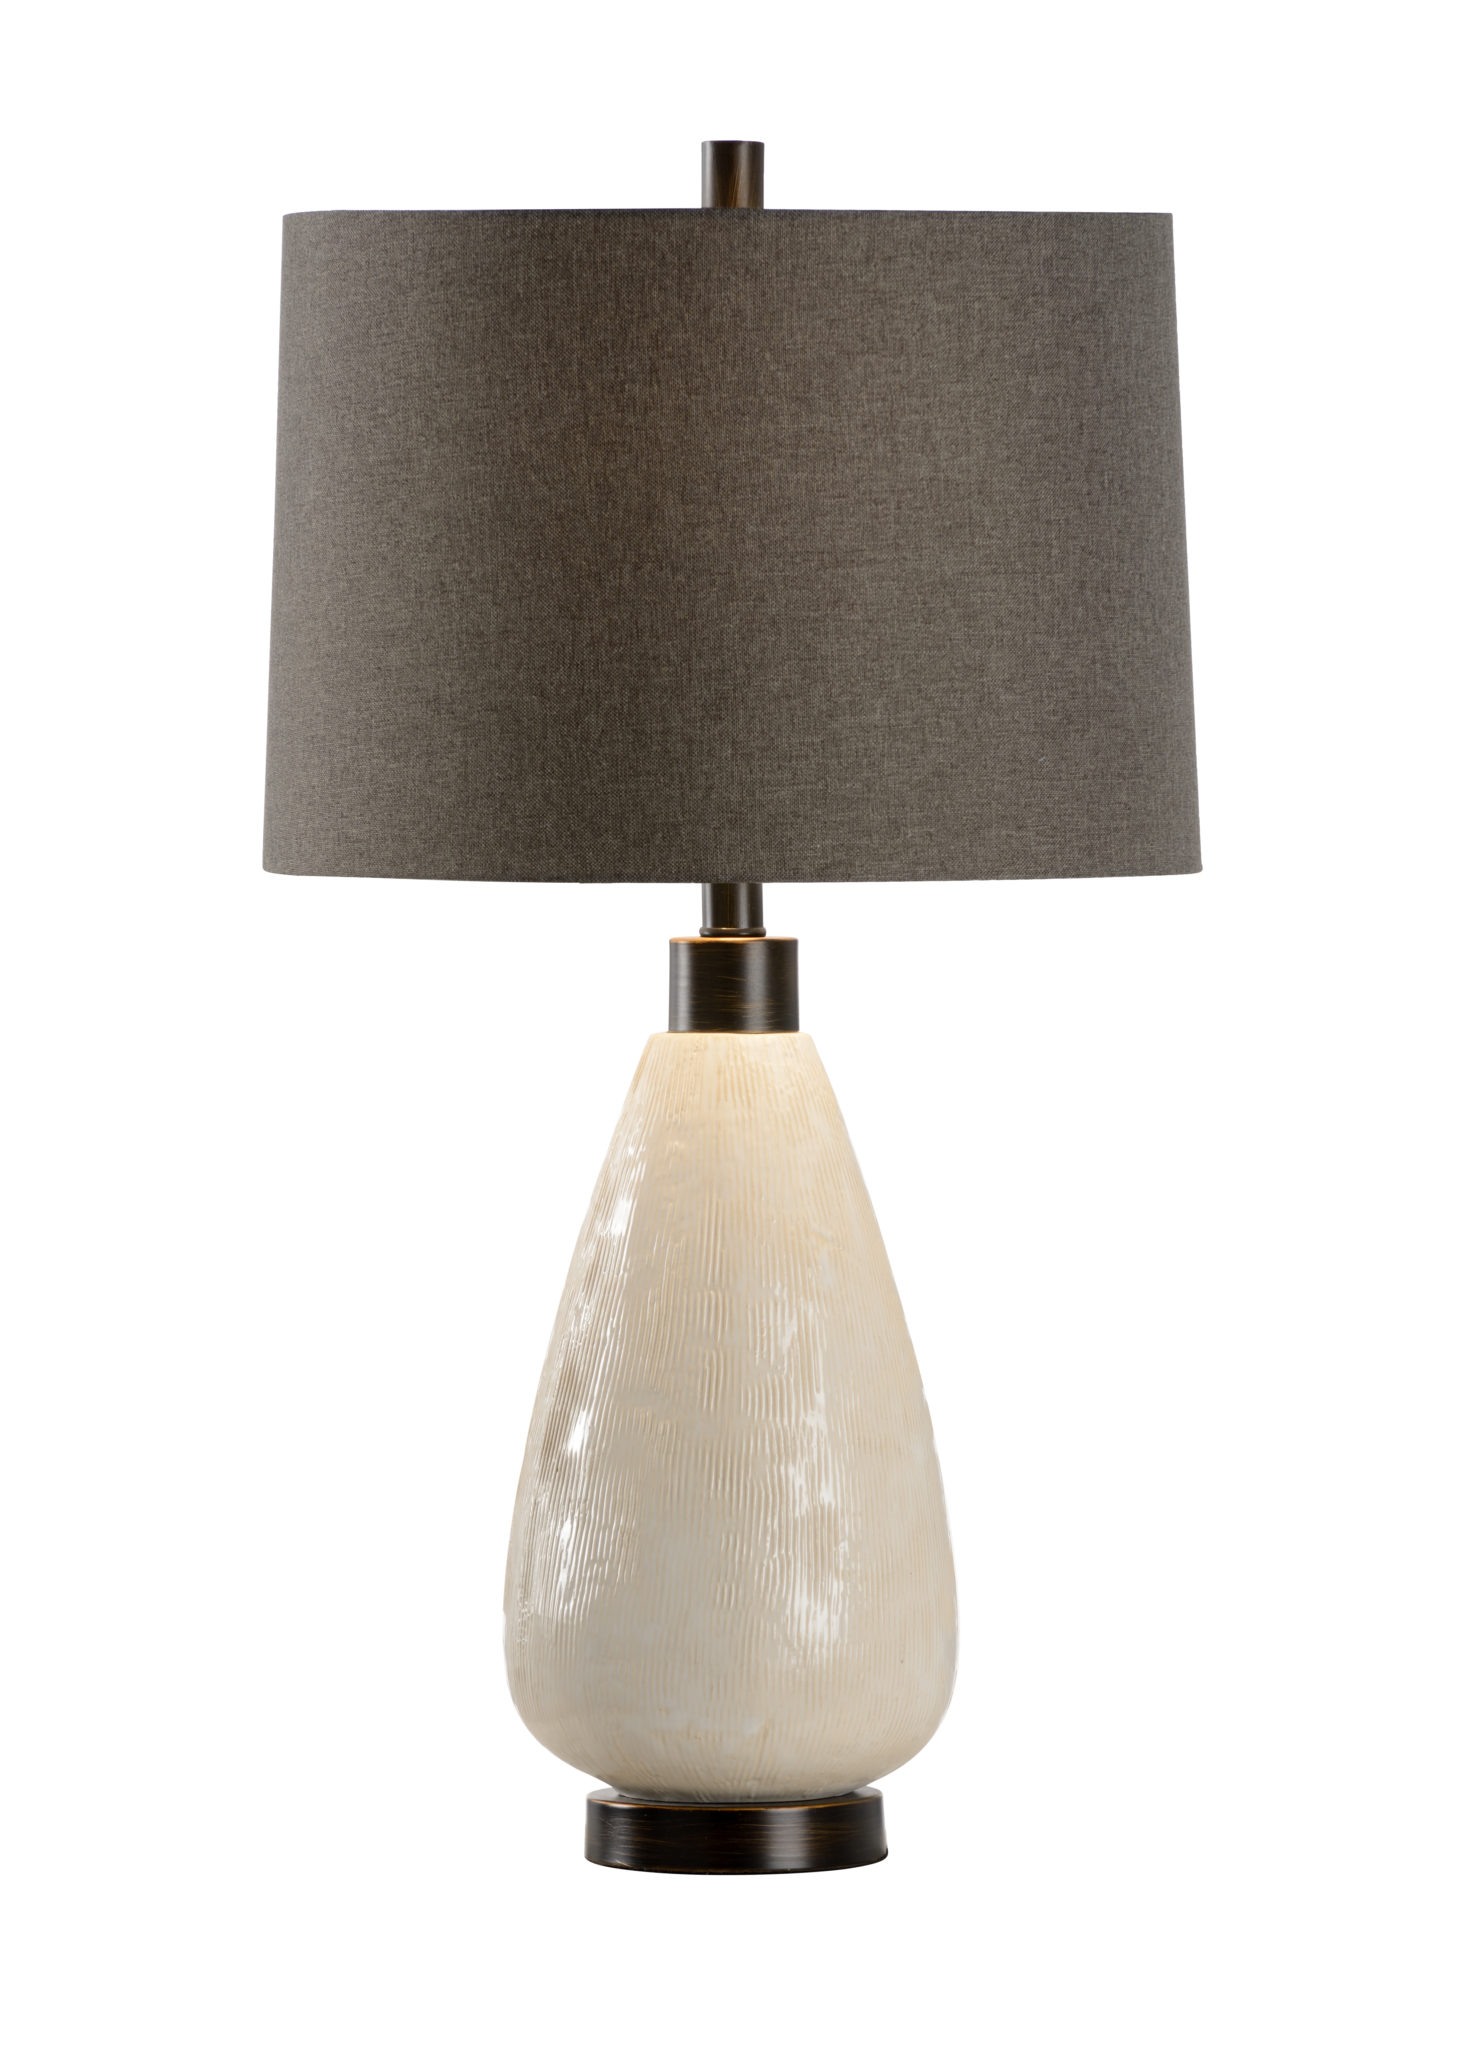 Kelsey White Ceramic Table Lamp by Wildwood Lamps - 27